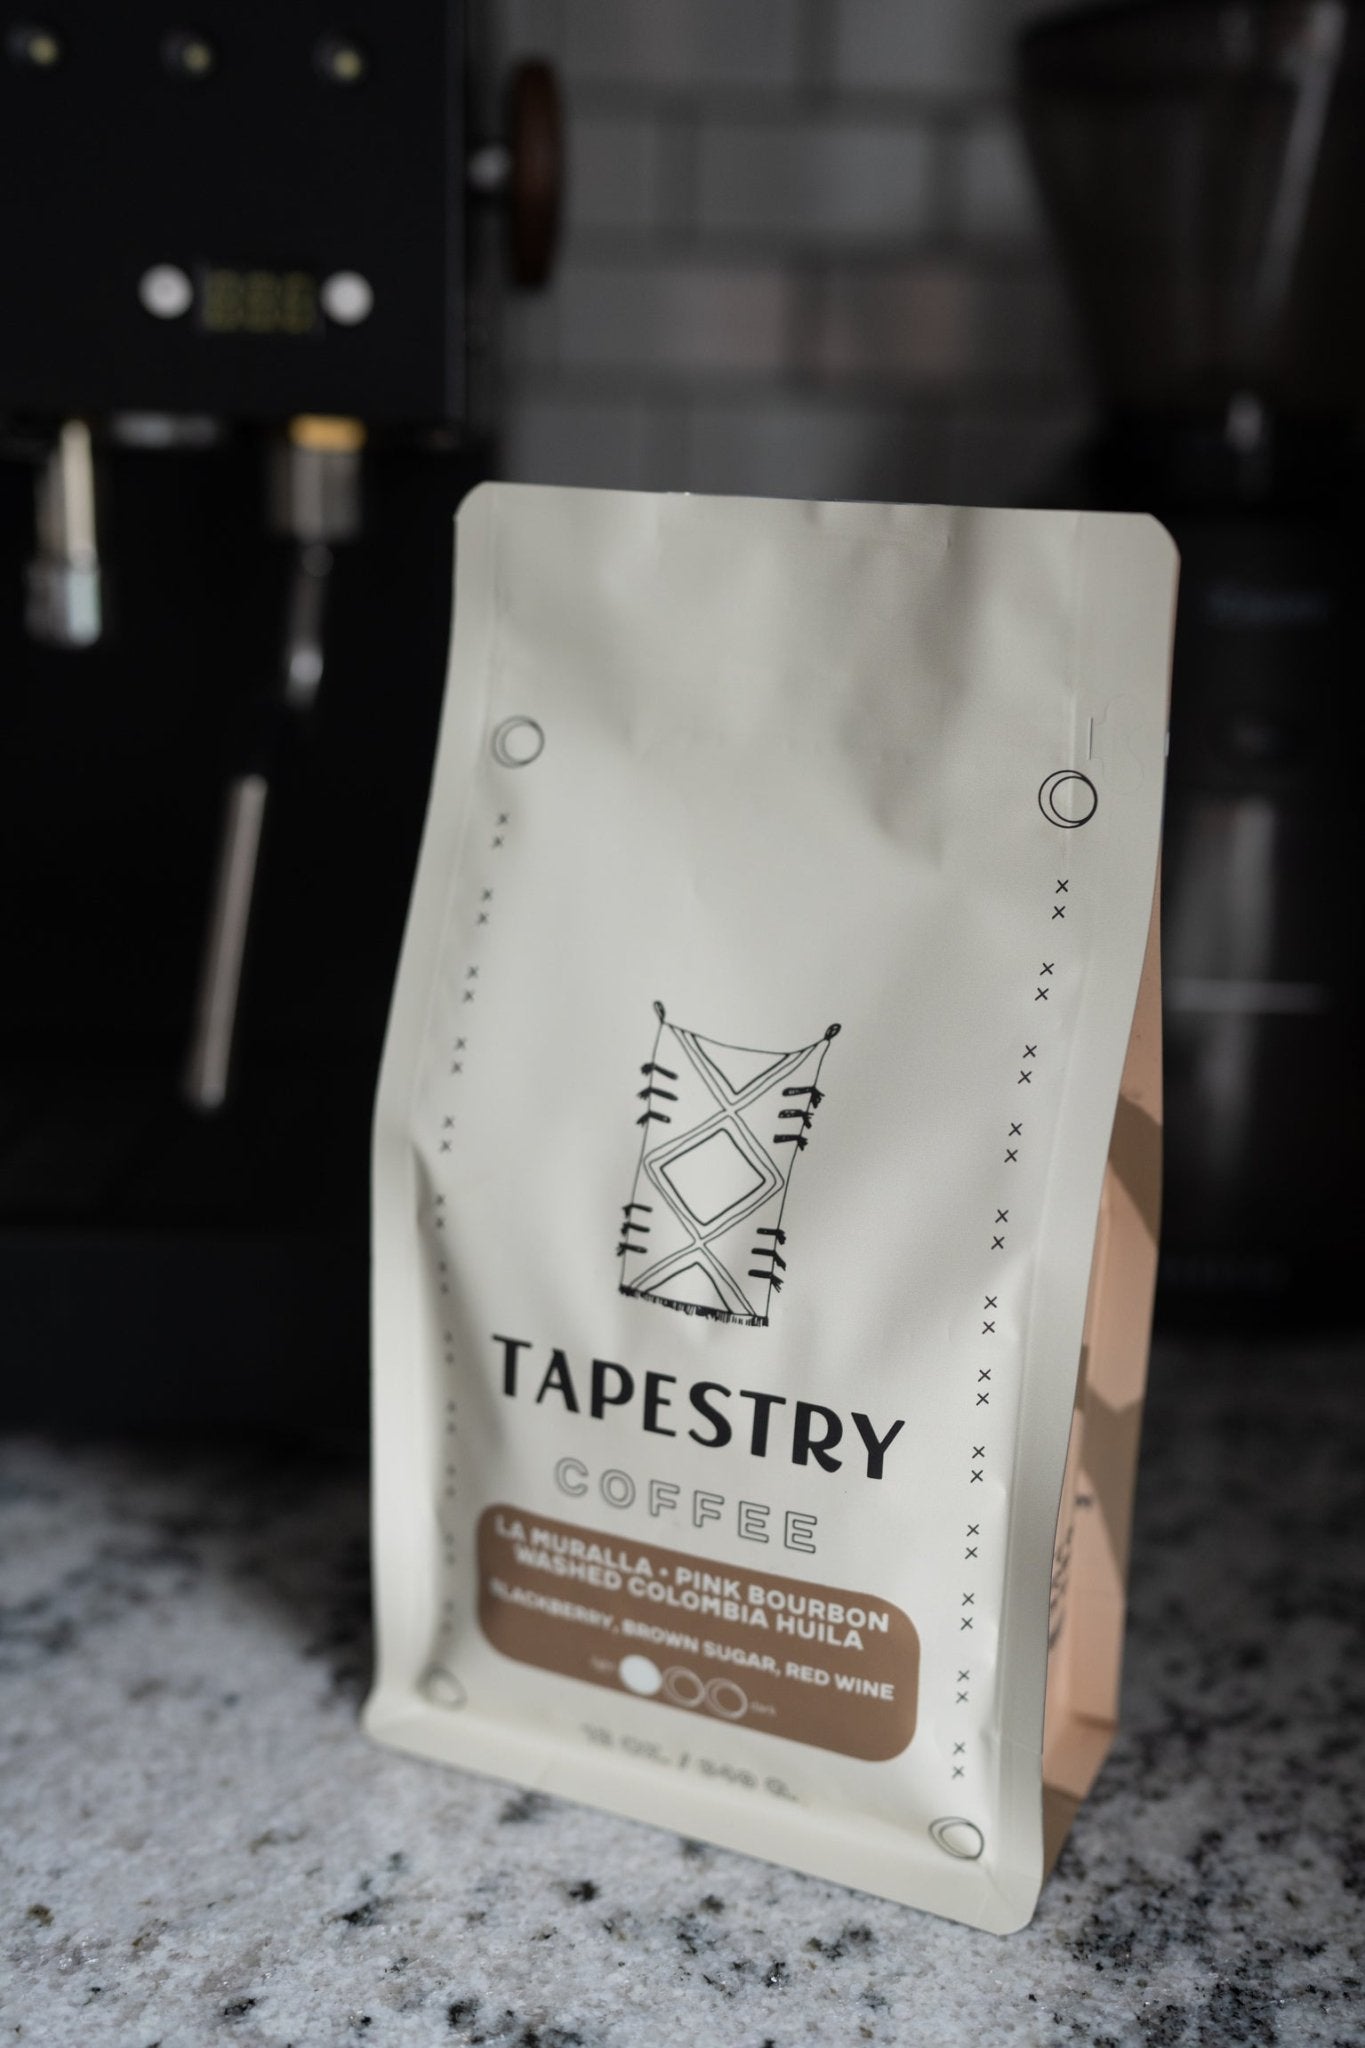 Coffee Subscriptions from $7.99 per bag, free US shipping